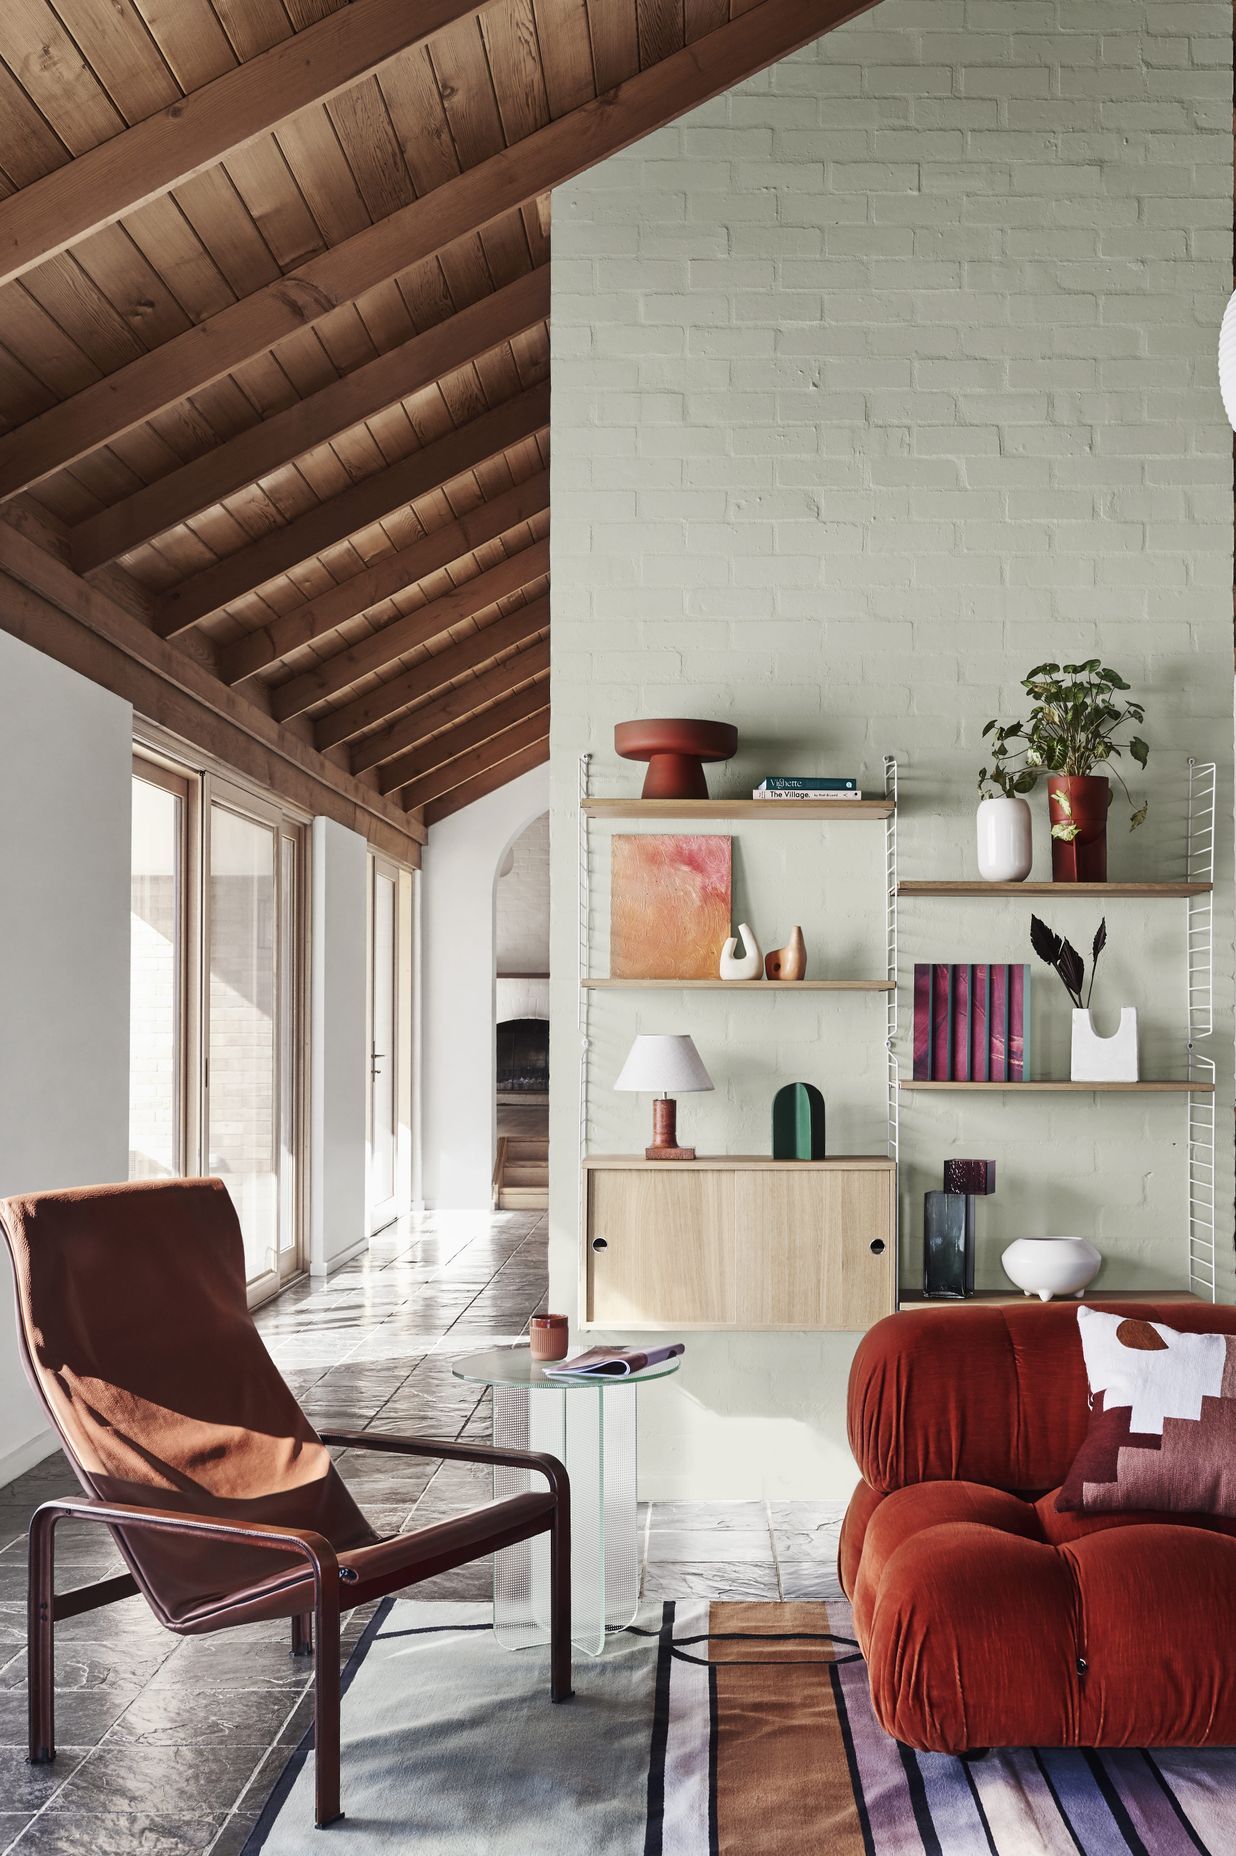 DULUX SUMMER FORECAST 2021. STYLIST: BREE LEECH. PHOTOGRAPHER: LISA COHEN. COLOURS: DULUX WOODS CREEK AND MT ASPIRING HALF. SUPPLIERS: VINTAGE CHAIR, GLASS VASE, ARTWORK (LEFT) BY RIA GREEN AND ARTWORK (RIGHT) BY TAJ ALEXANDER – MODERN TIMES; RUG – FENTON